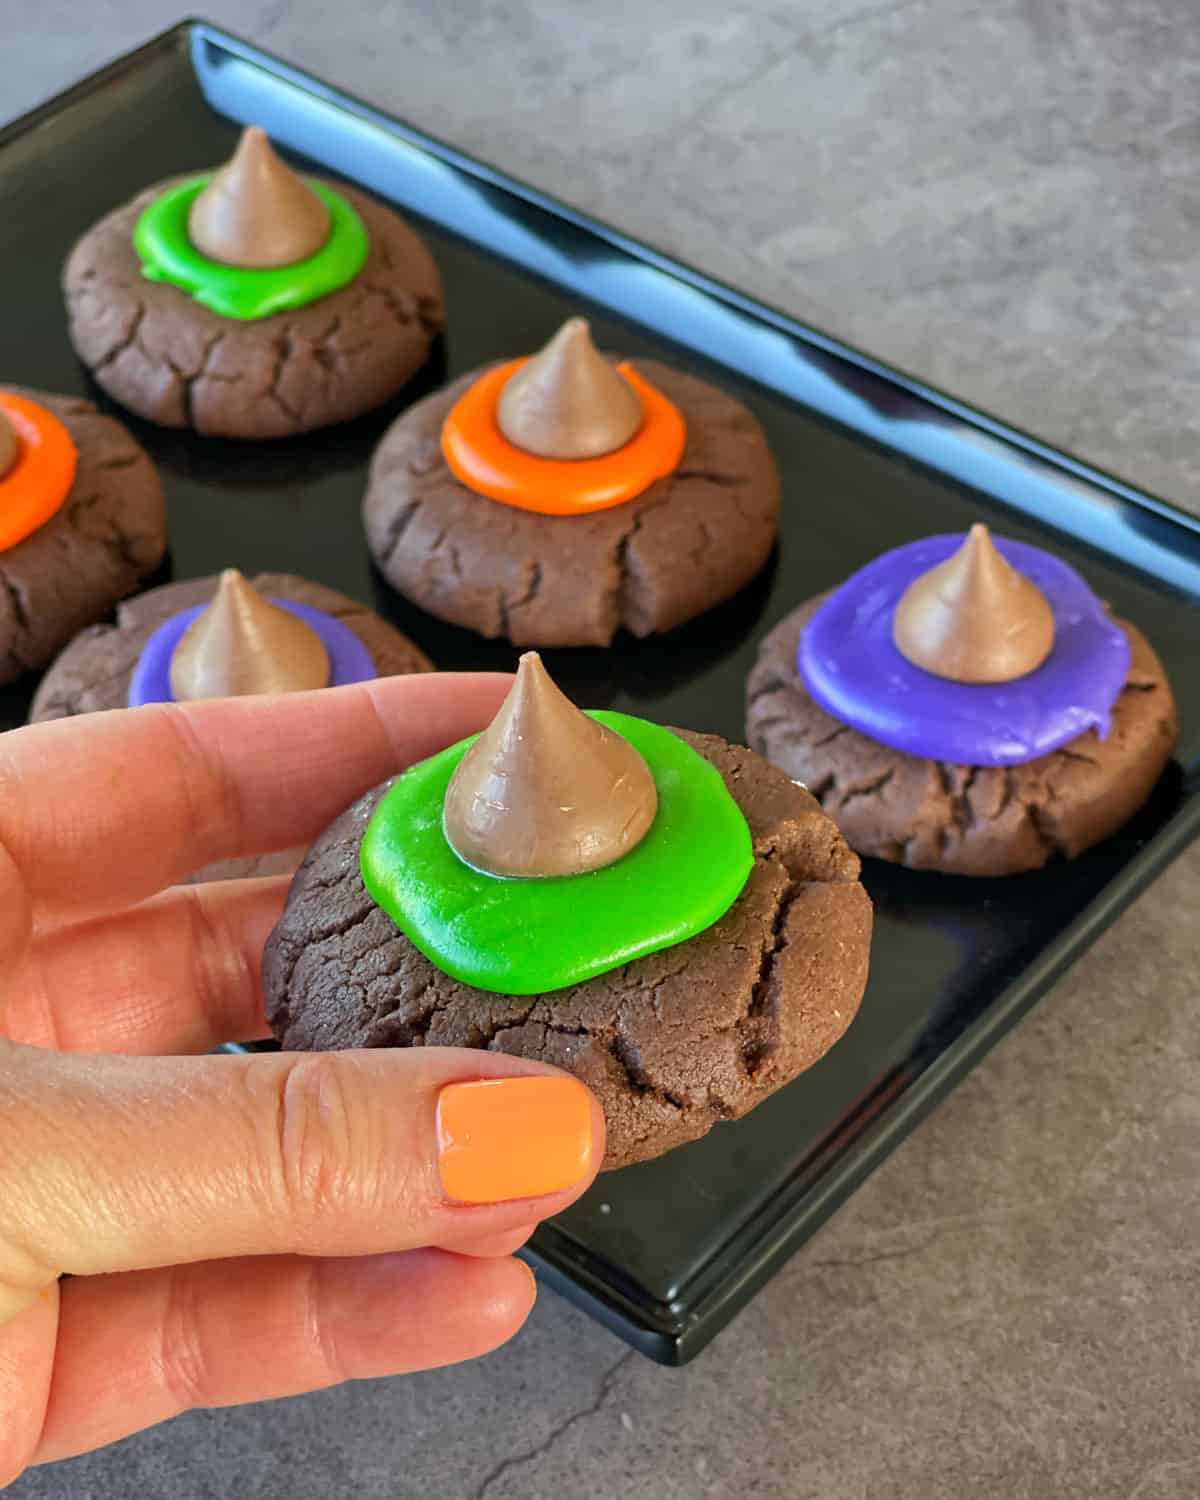 A hand holding a witches hat cookie with a tray of cookies in the background.